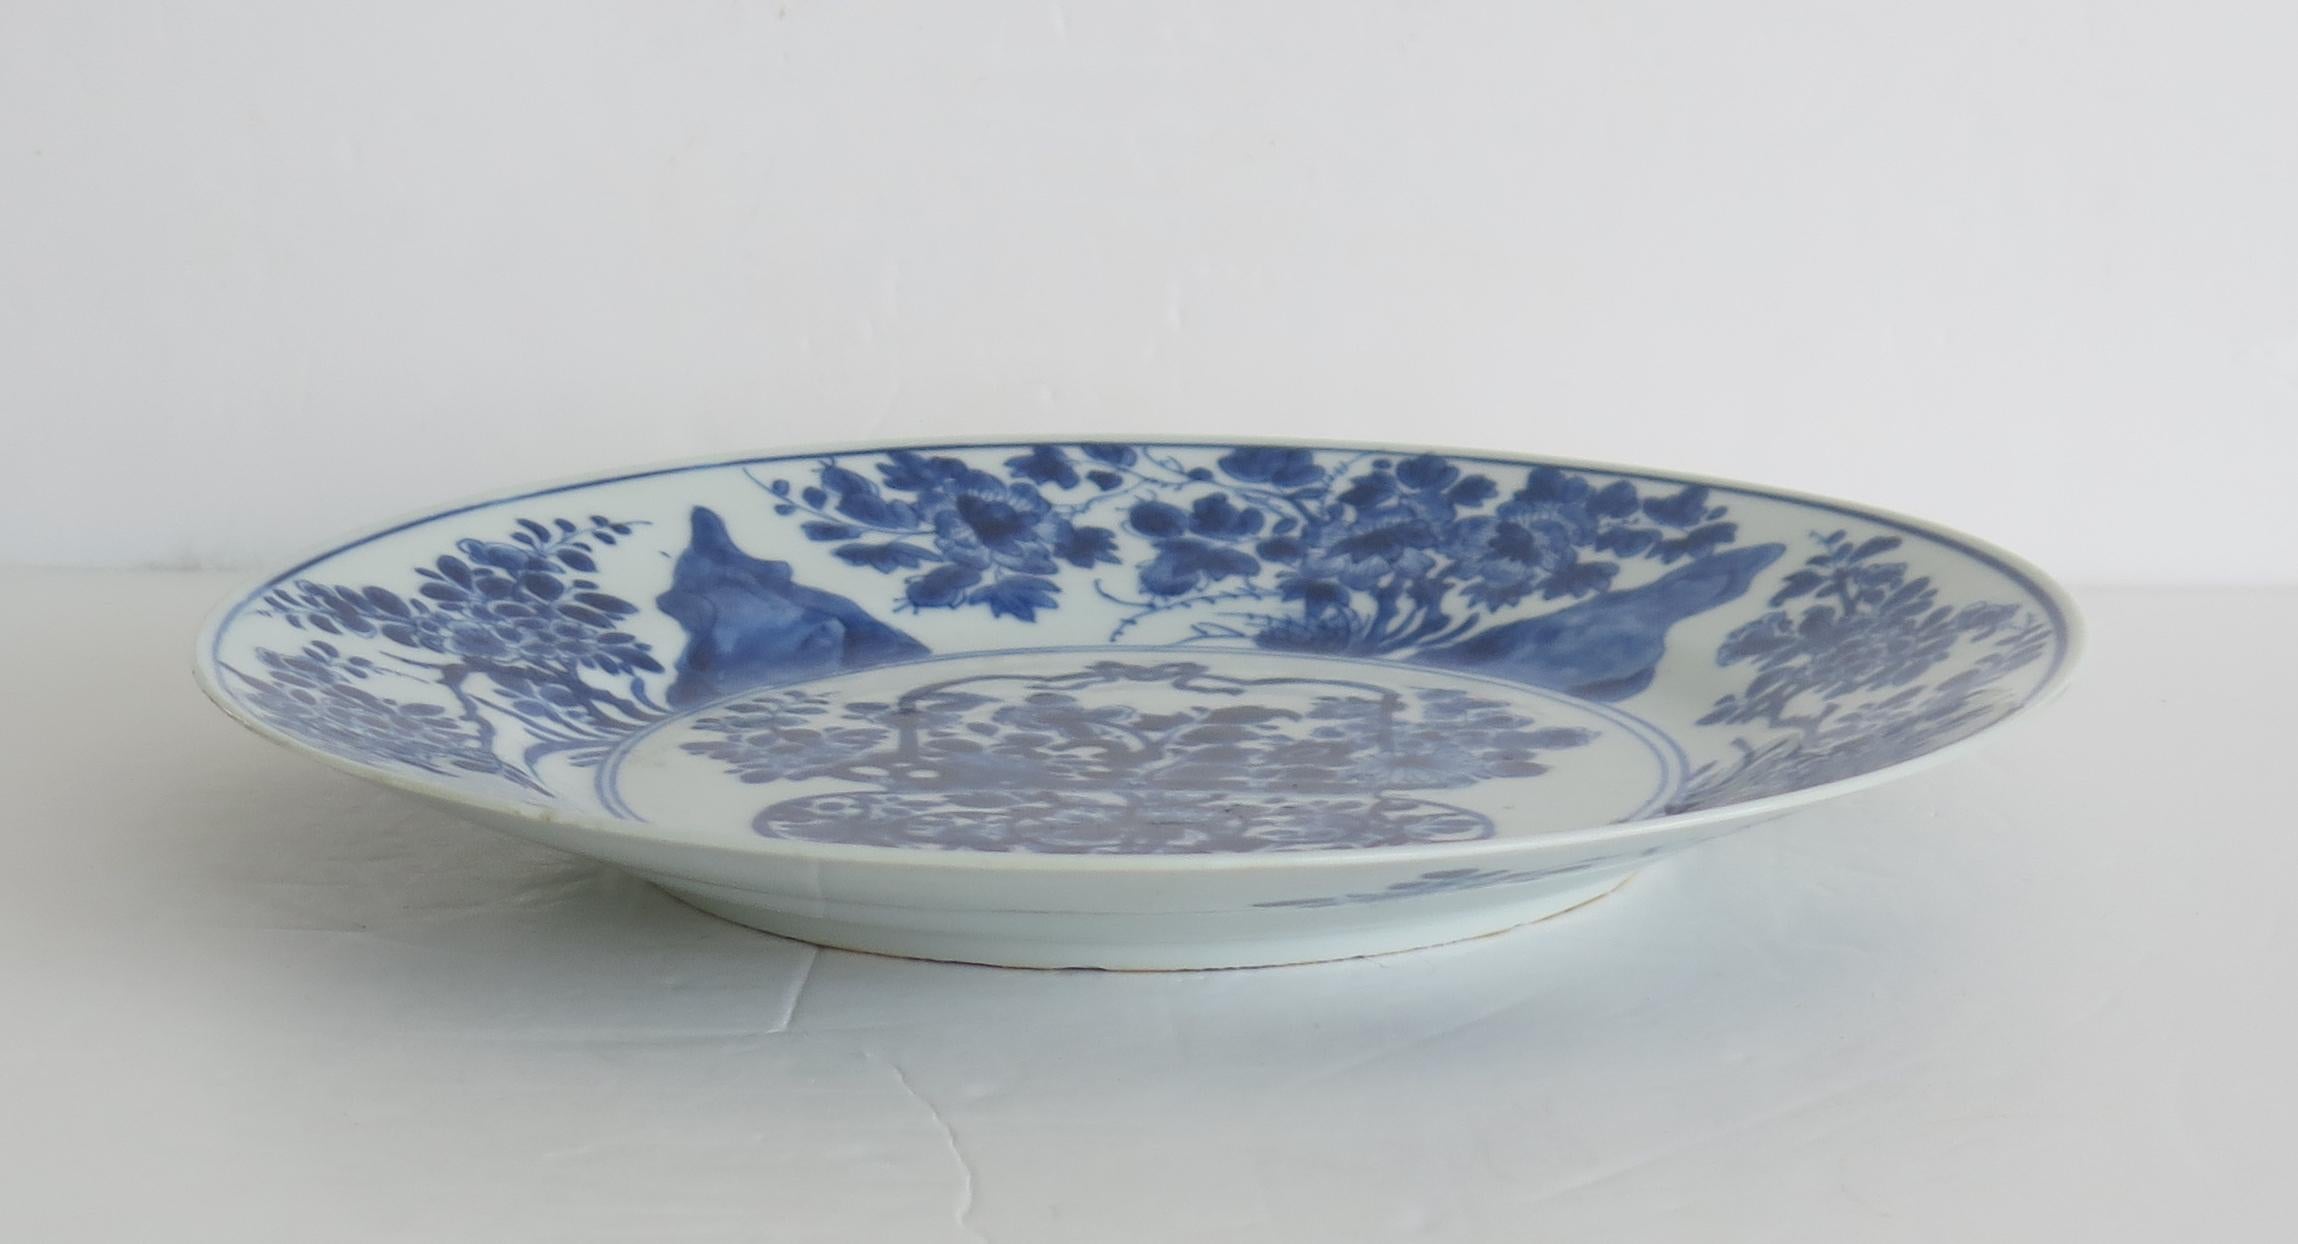 Kangxi Marked Chinese Large Plate Porcelain Blue & White Flower Bask, circa 1700 For Sale 3